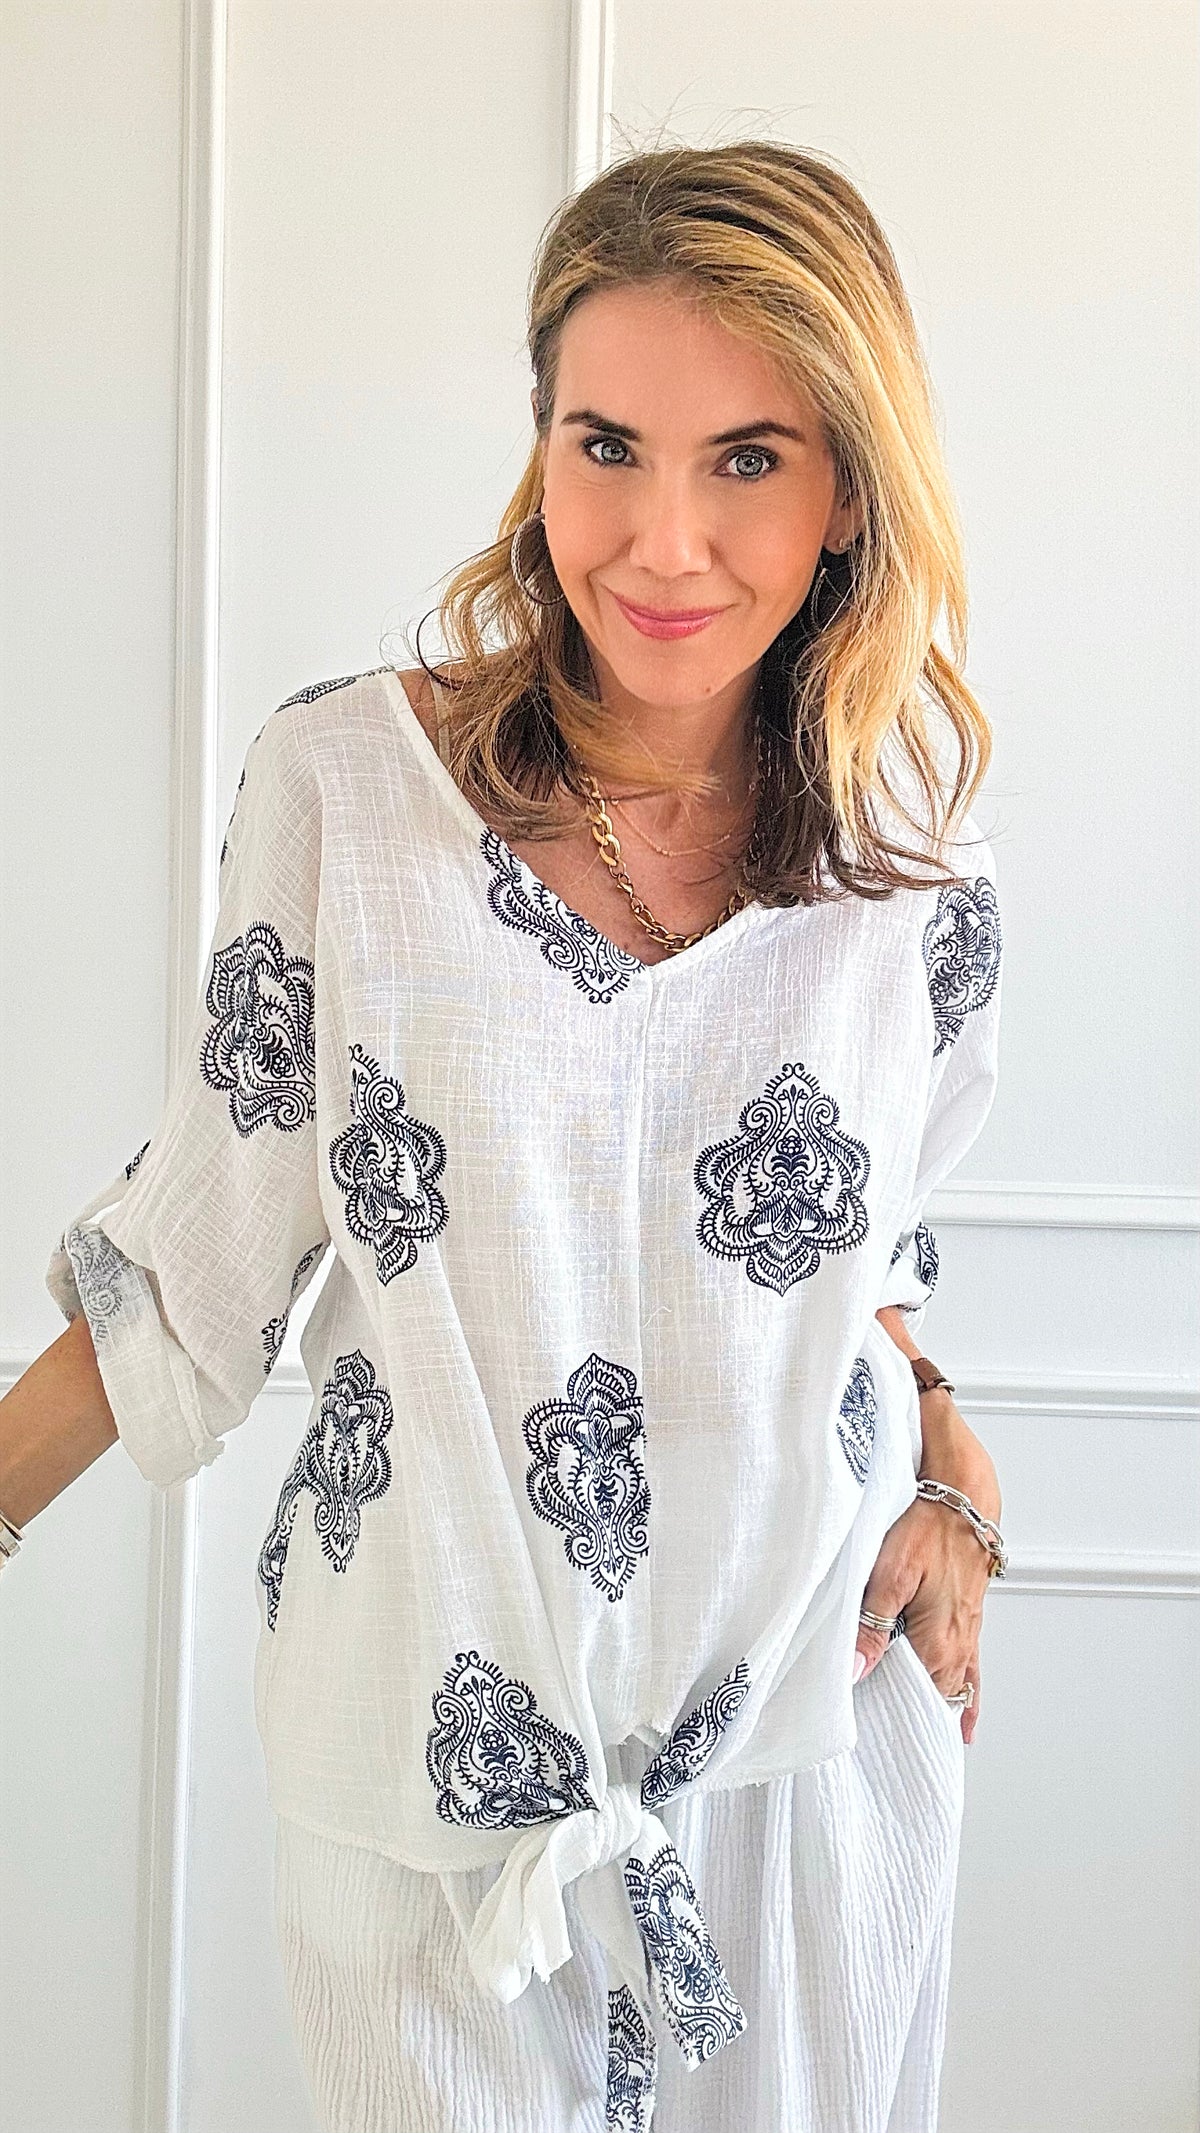 Moroccan Tile Linen Italian Top - White-110 Short Sleeve Tops-Italianissimo-Coastal Bloom Boutique, find the trendiest versions of the popular styles and looks Located in Indialantic, FL